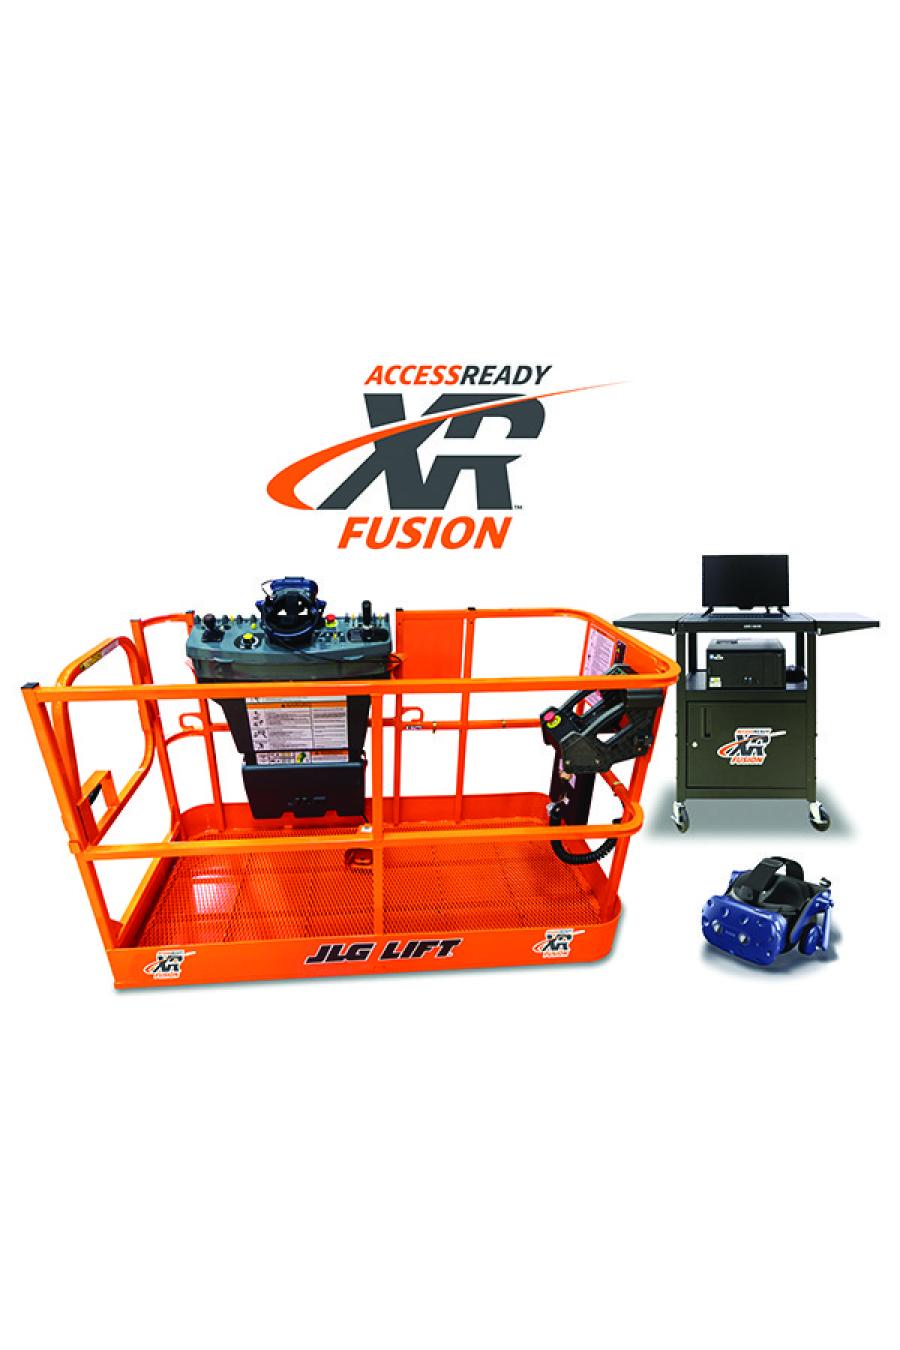 With AccessReady Fusion XR, both boom and scissor lift VR training are available in one unit. Users become familiar with each MEWP type and its controls, while improving skills prior to stepping into an actual machine.